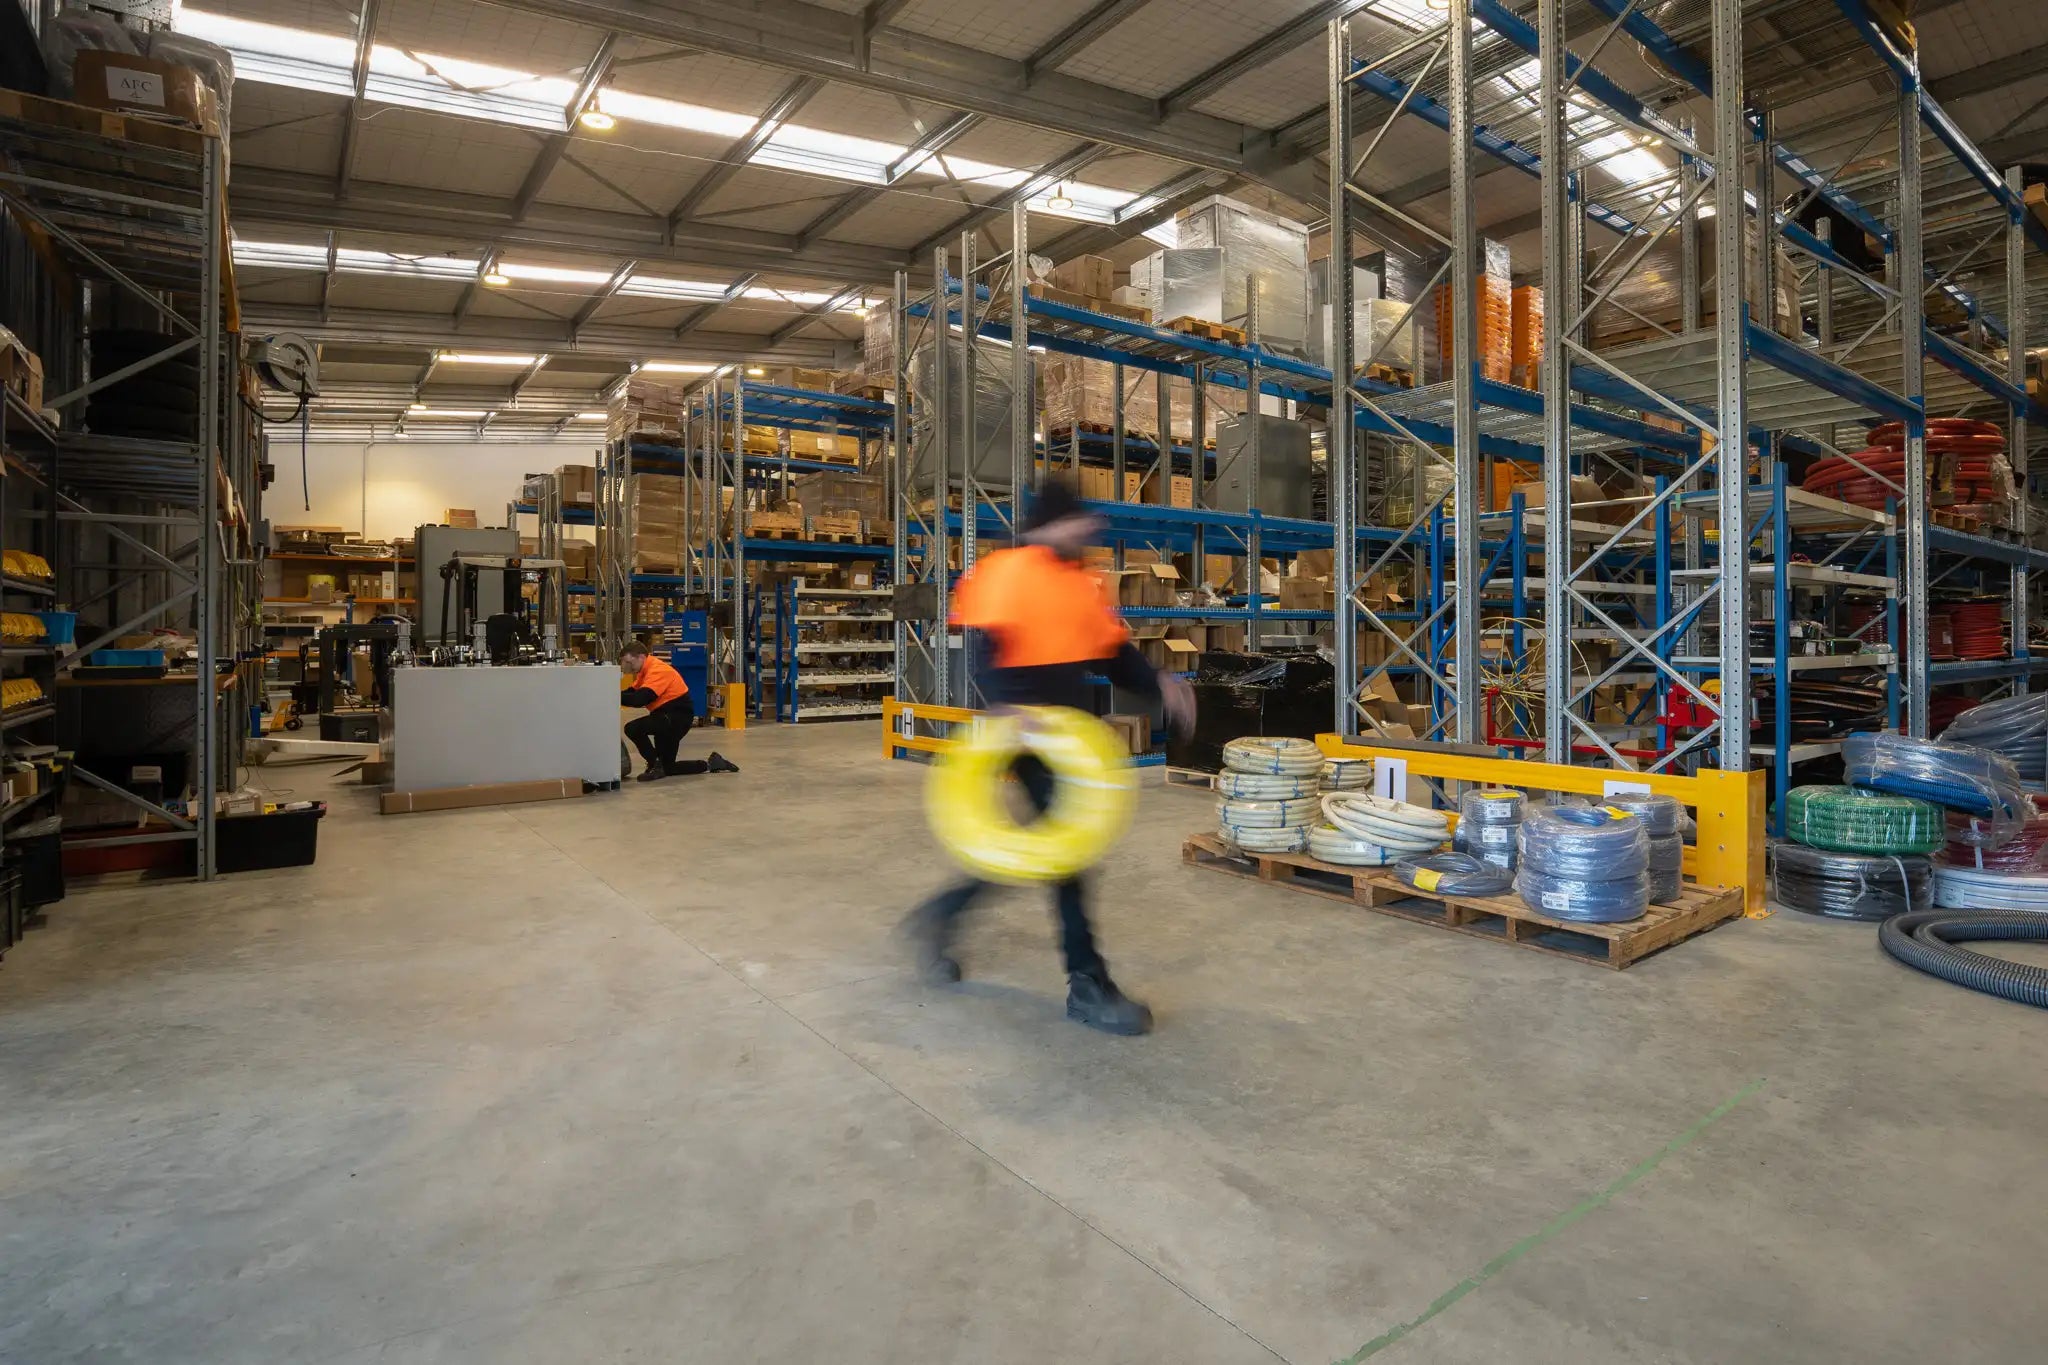 An image of the United Flexible Interior of a their busy warehouse with employees at work, featuring high storage racks filled with materials and a worker in motion carrying a yellow coil of hose, highlighting the dynamic industrial environment.